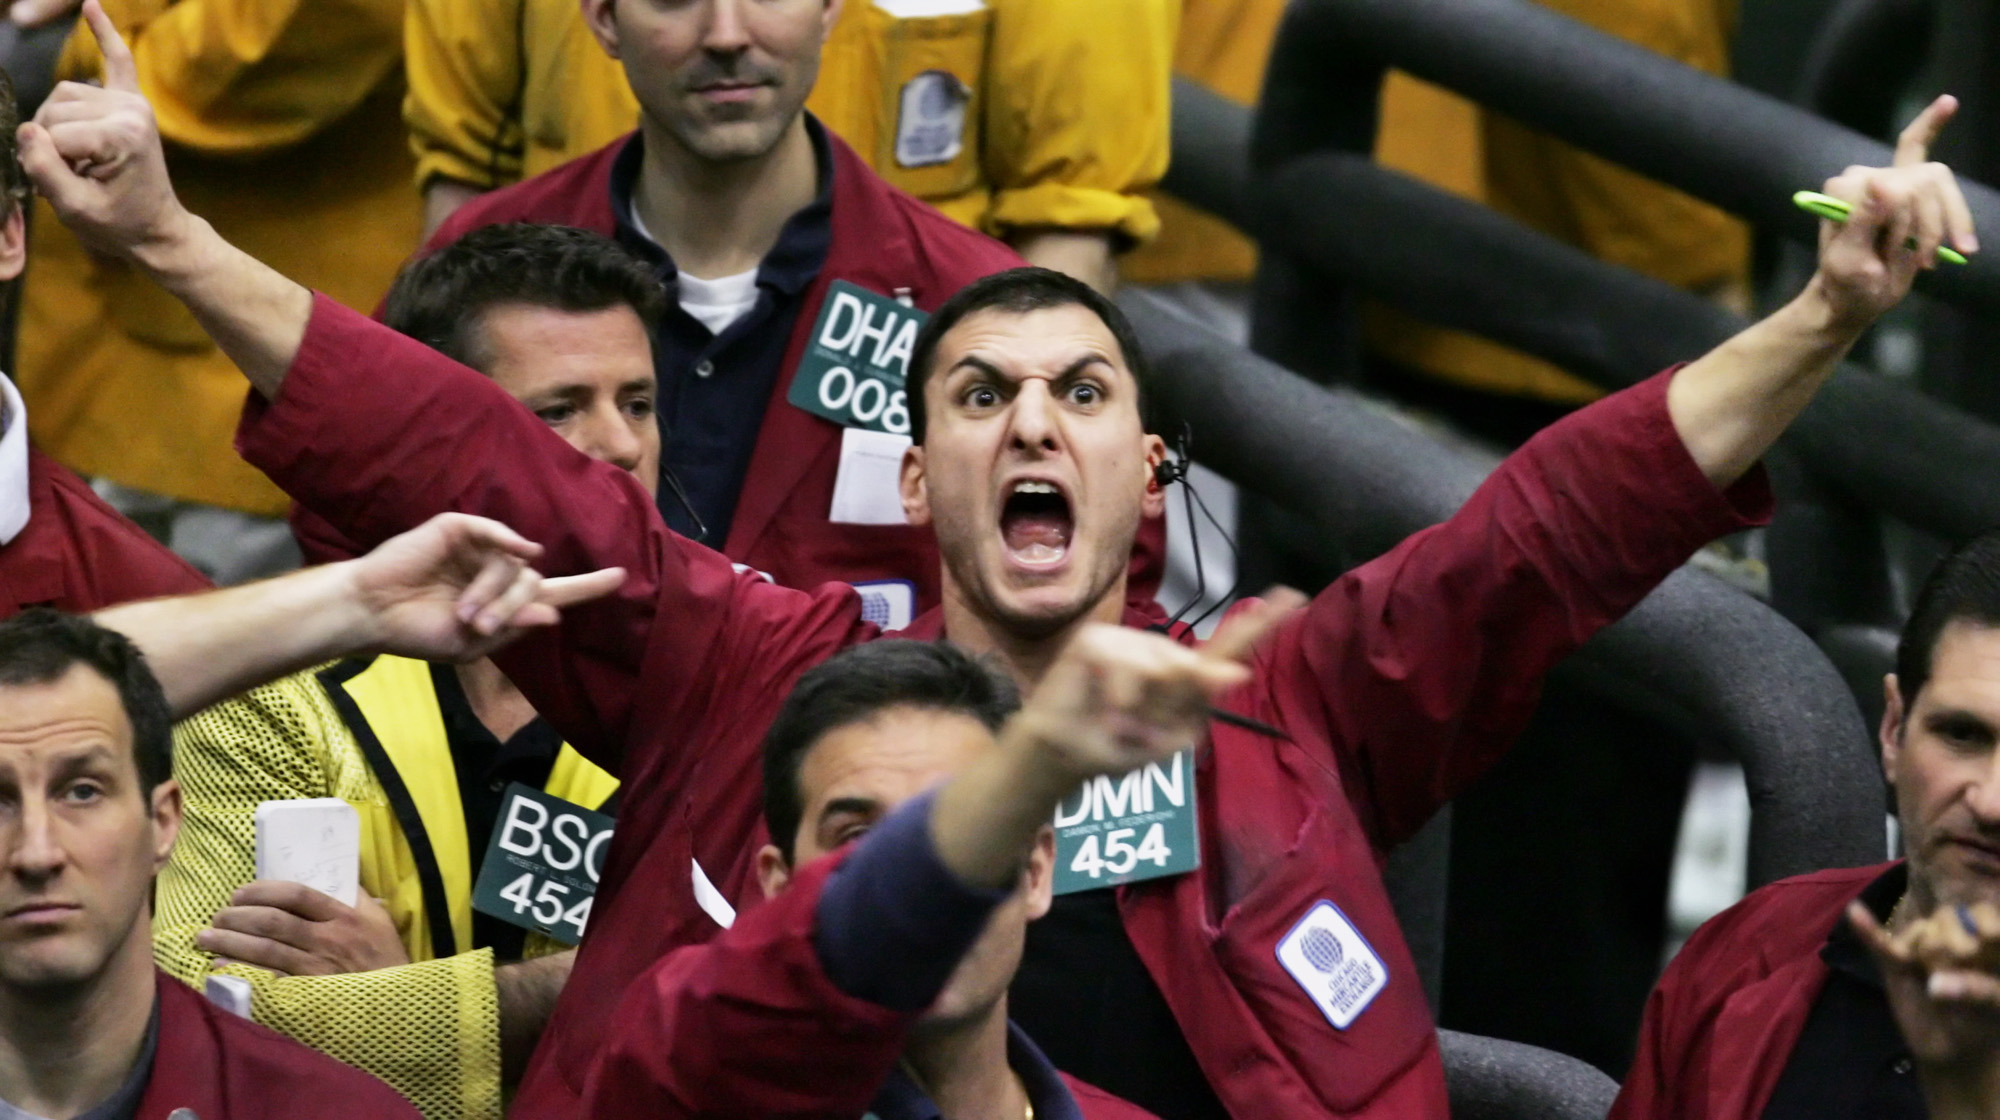 As trading pits close, traders yearn for 'roar' of old